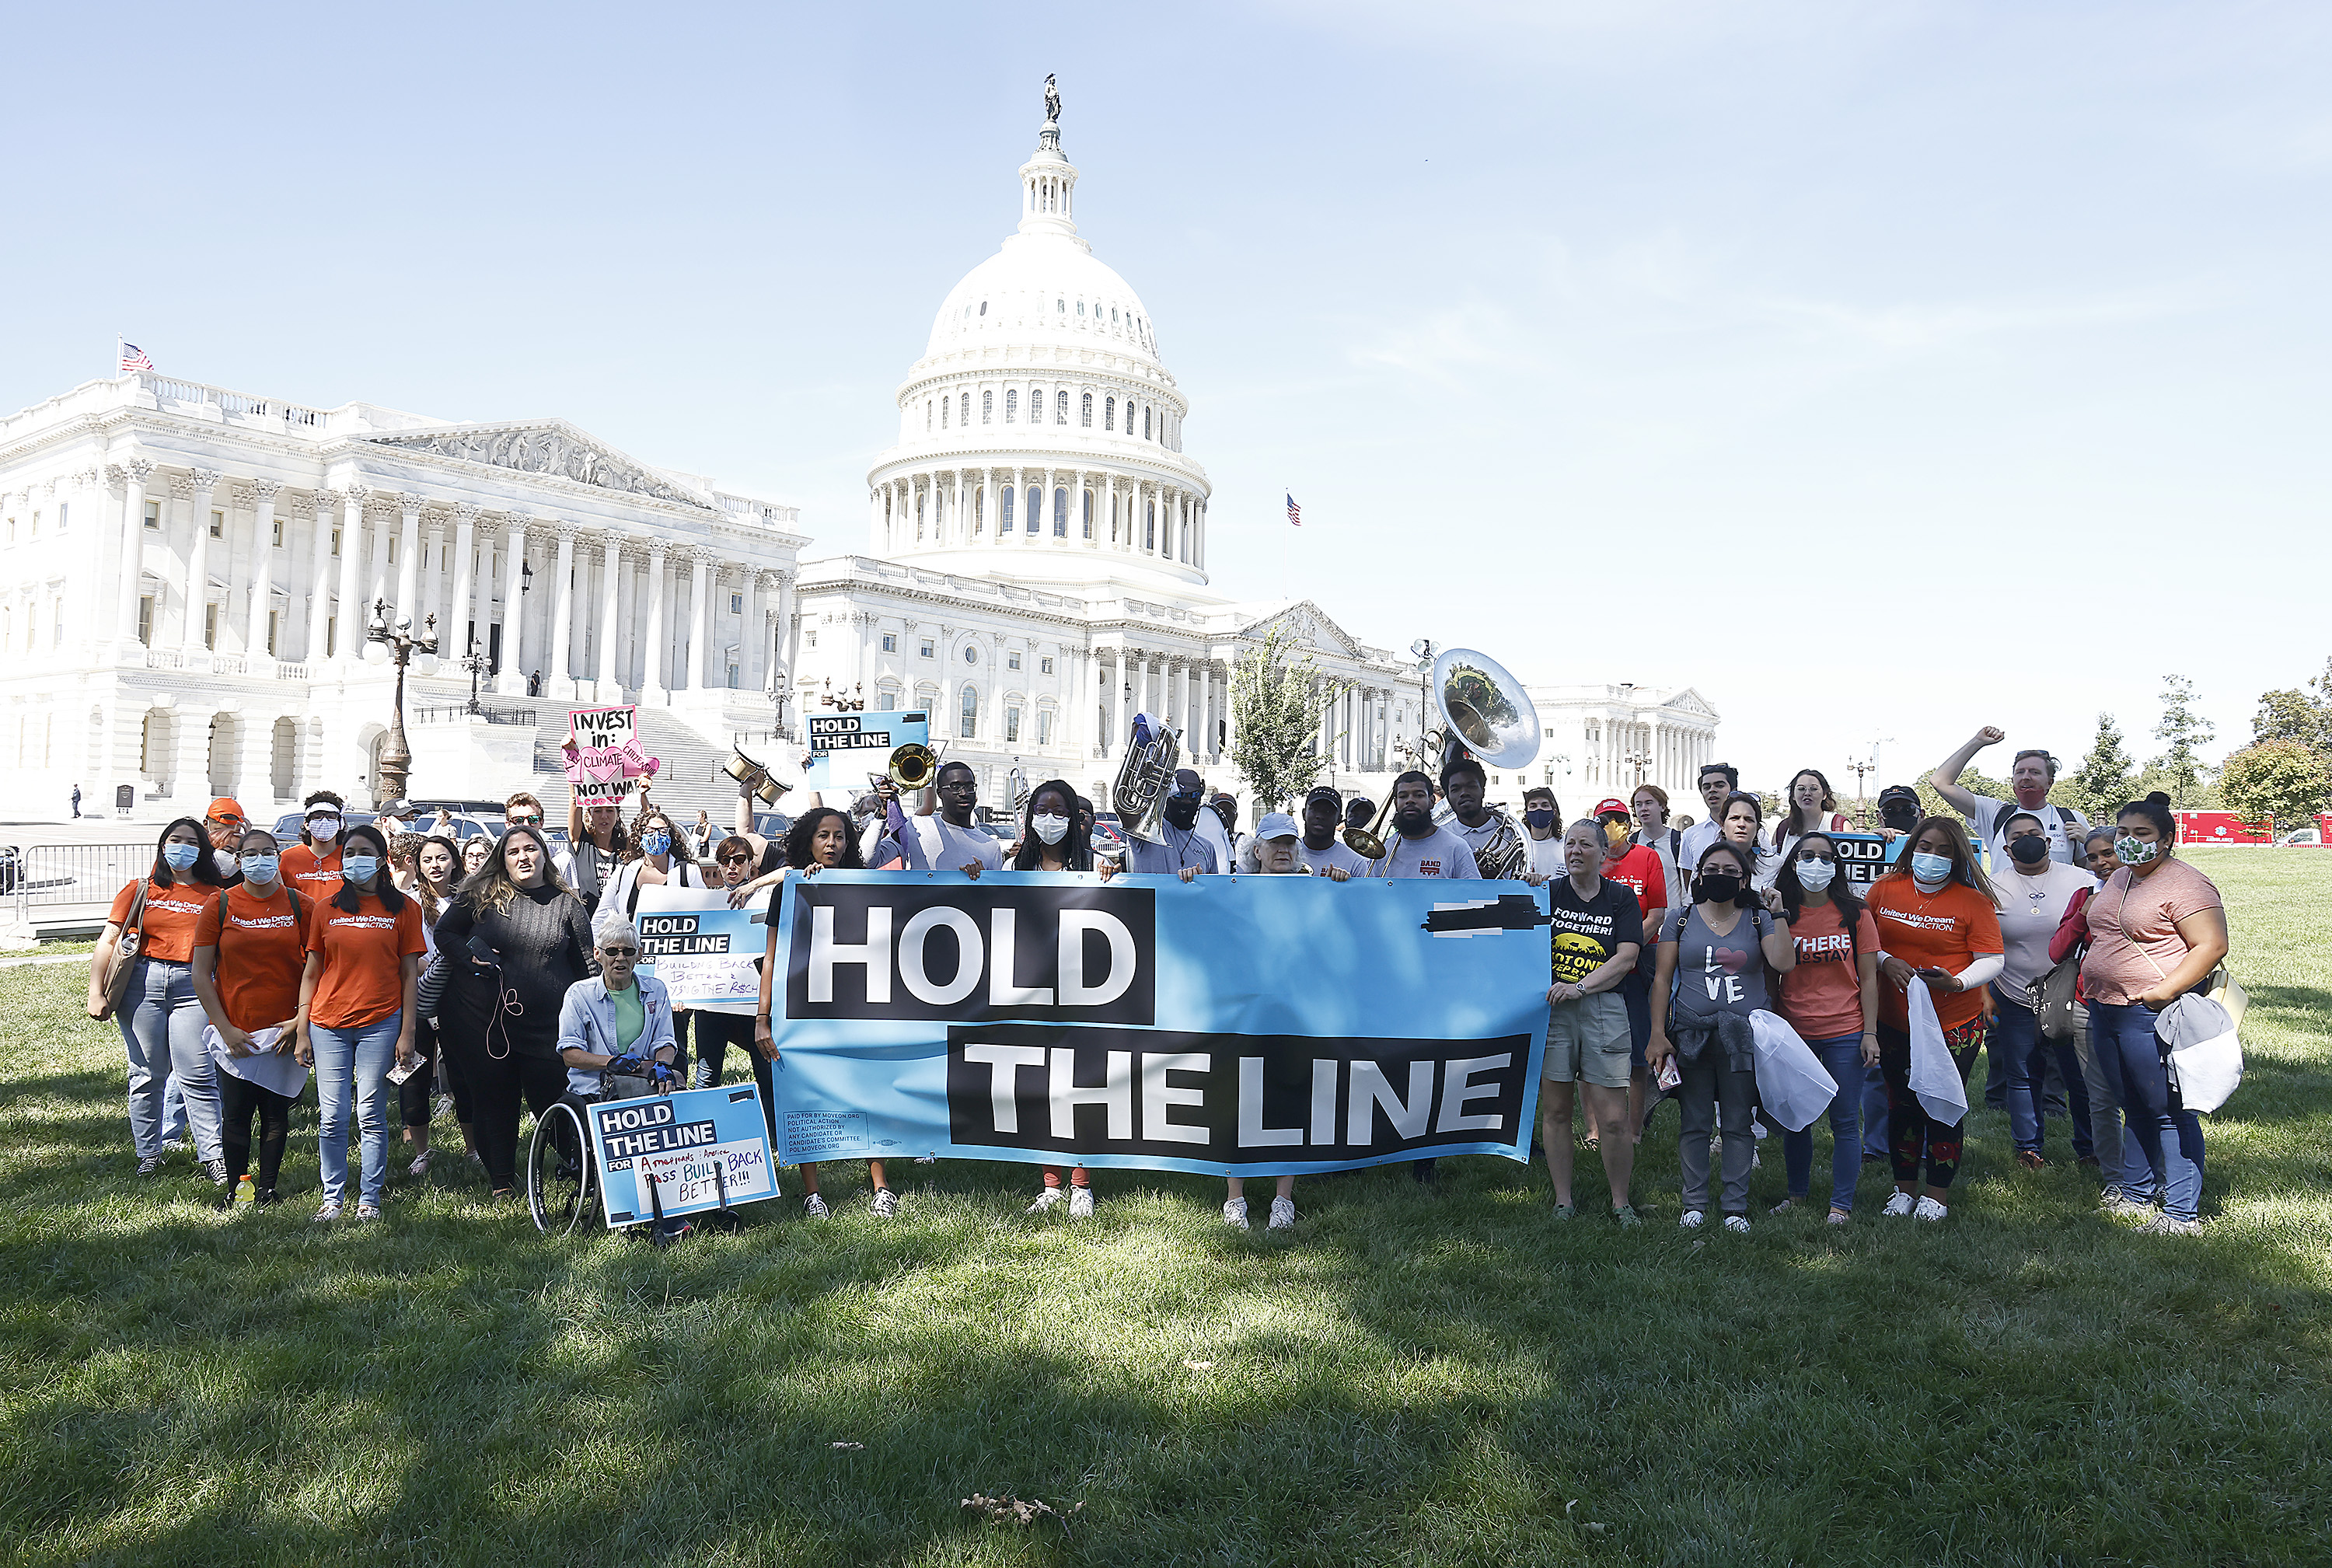 Demonstrators stand on the lawn in front of the US Capitol holding a banner that reads “hold the line.”